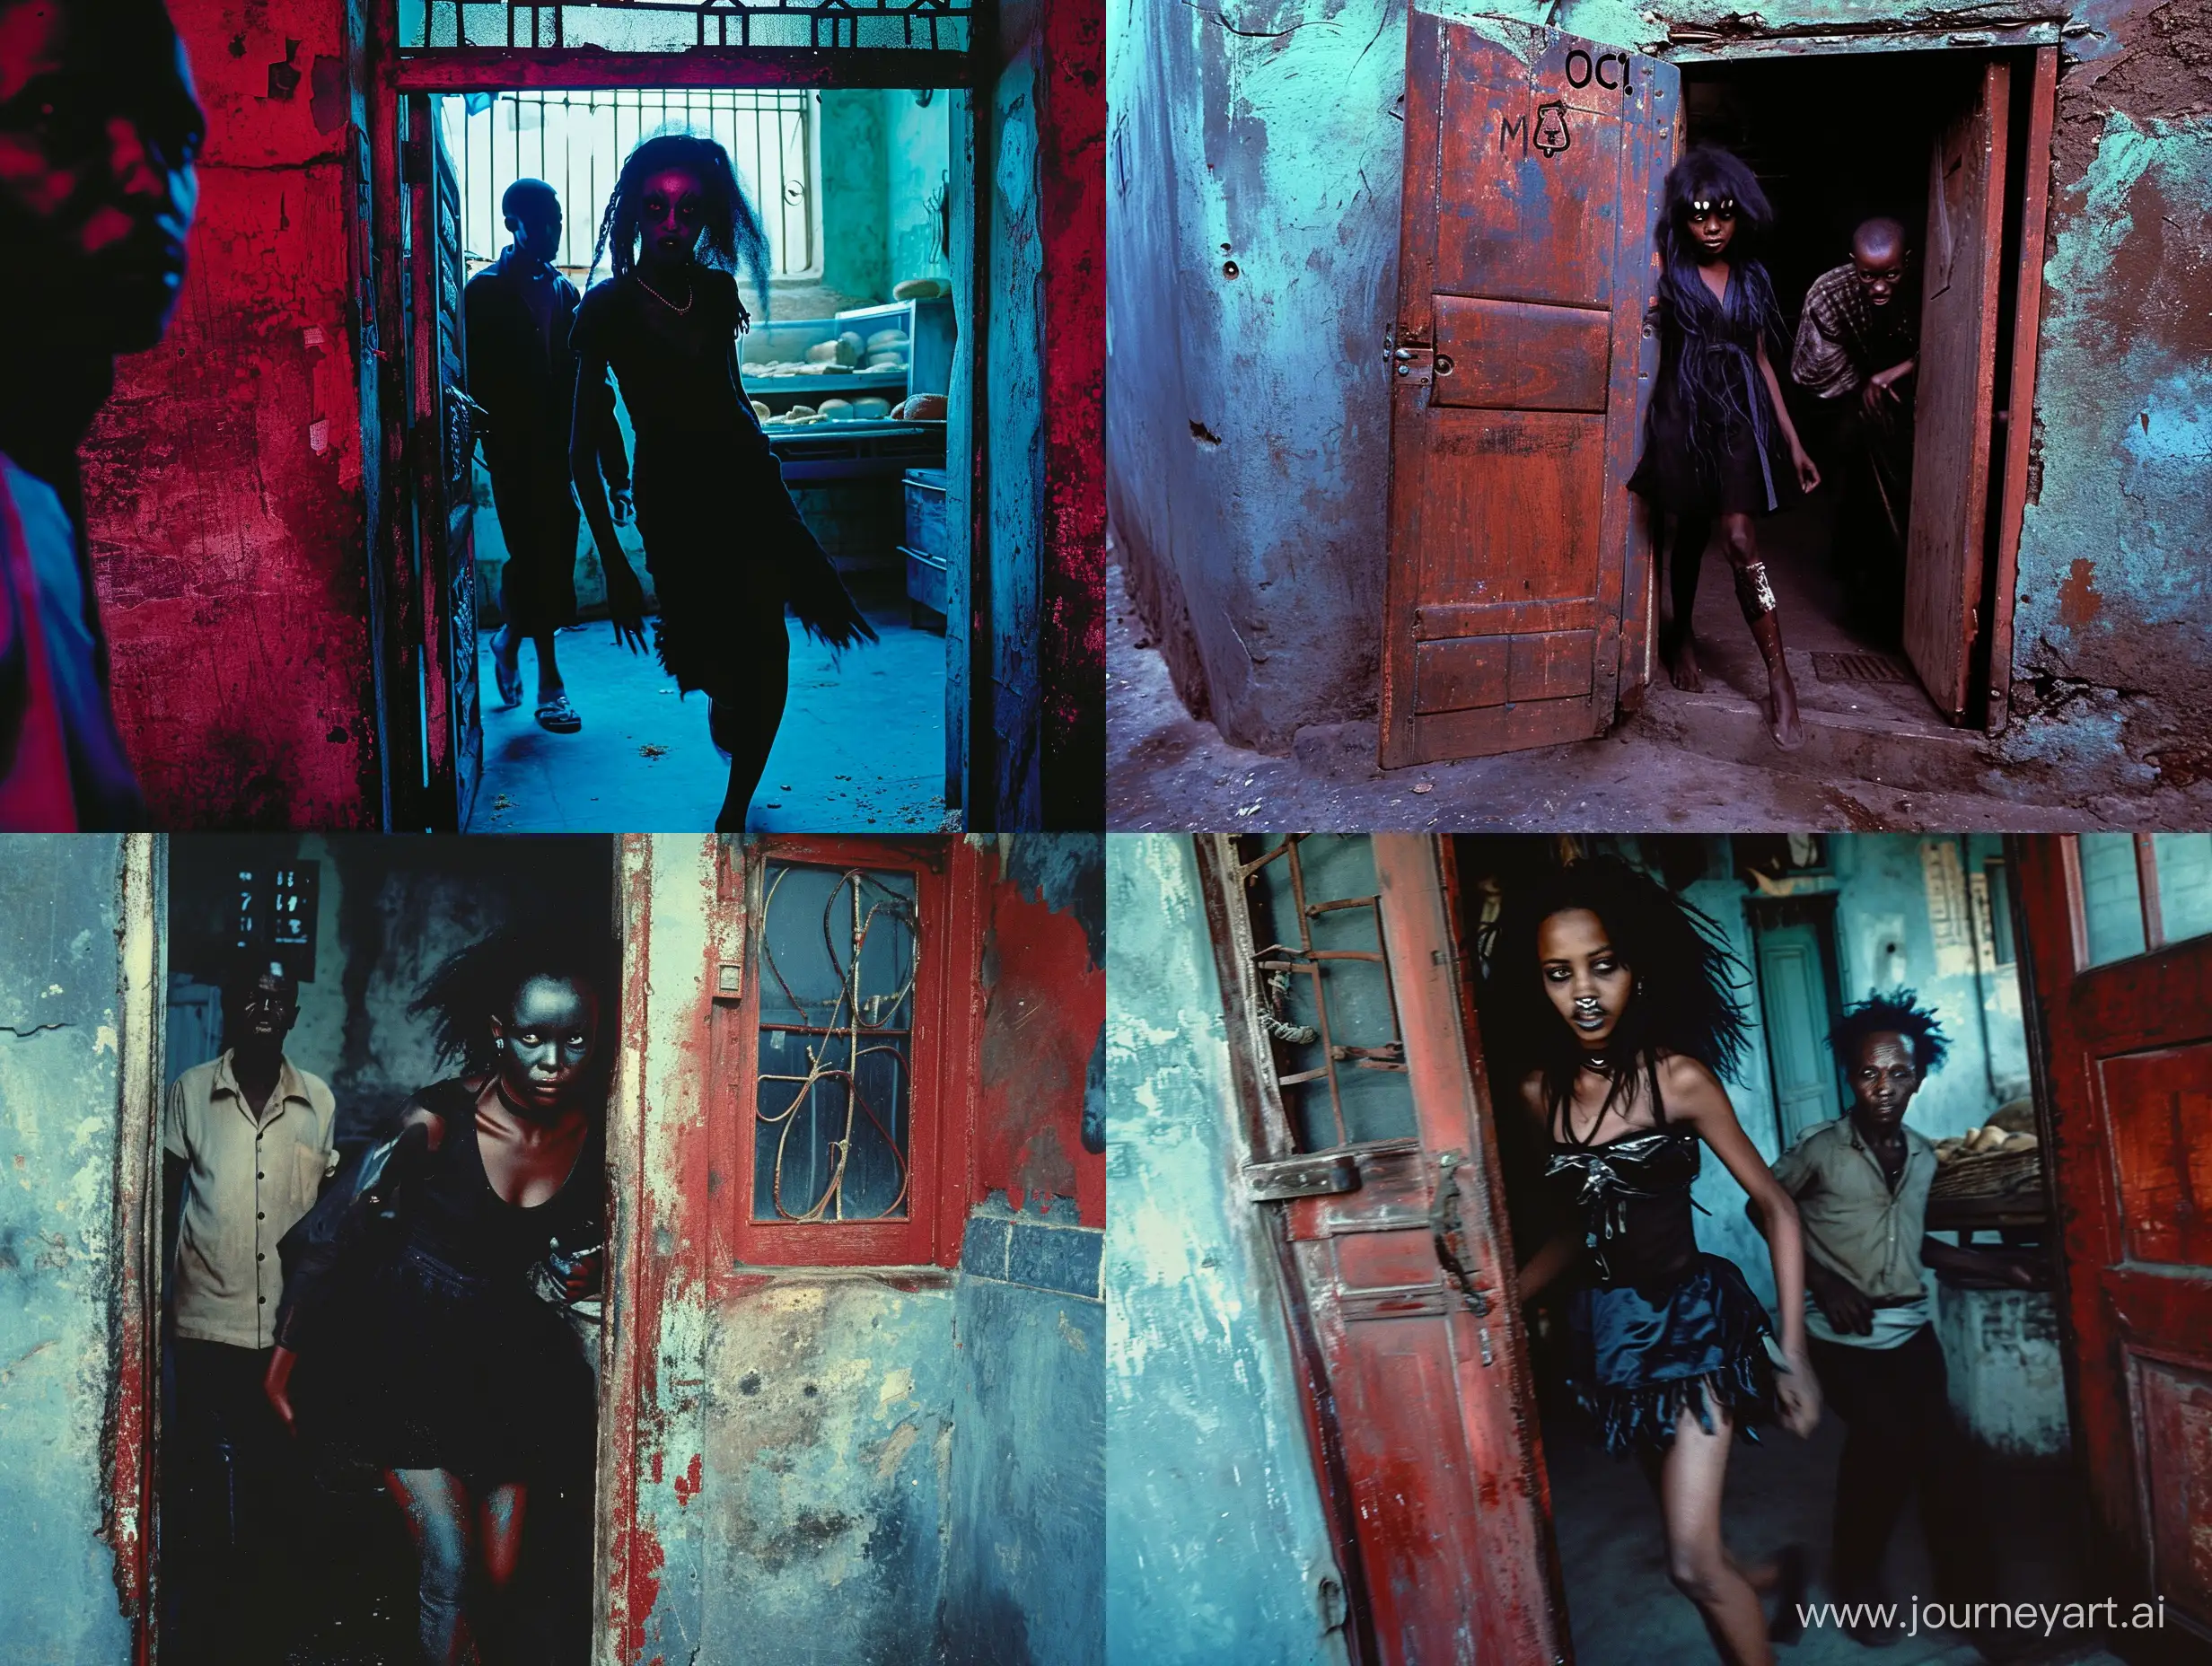 A photo taken in 1998 that shows an Ethiopian goth girl going to the bakery to buy bread for her hungry mother, she is walking through the door in slow motion, very confident of herself and the baker is looking at her with acute fear. The quality of the scene is clearly grainy and has intense tones of red and blue. The camera angle is a little smaller.